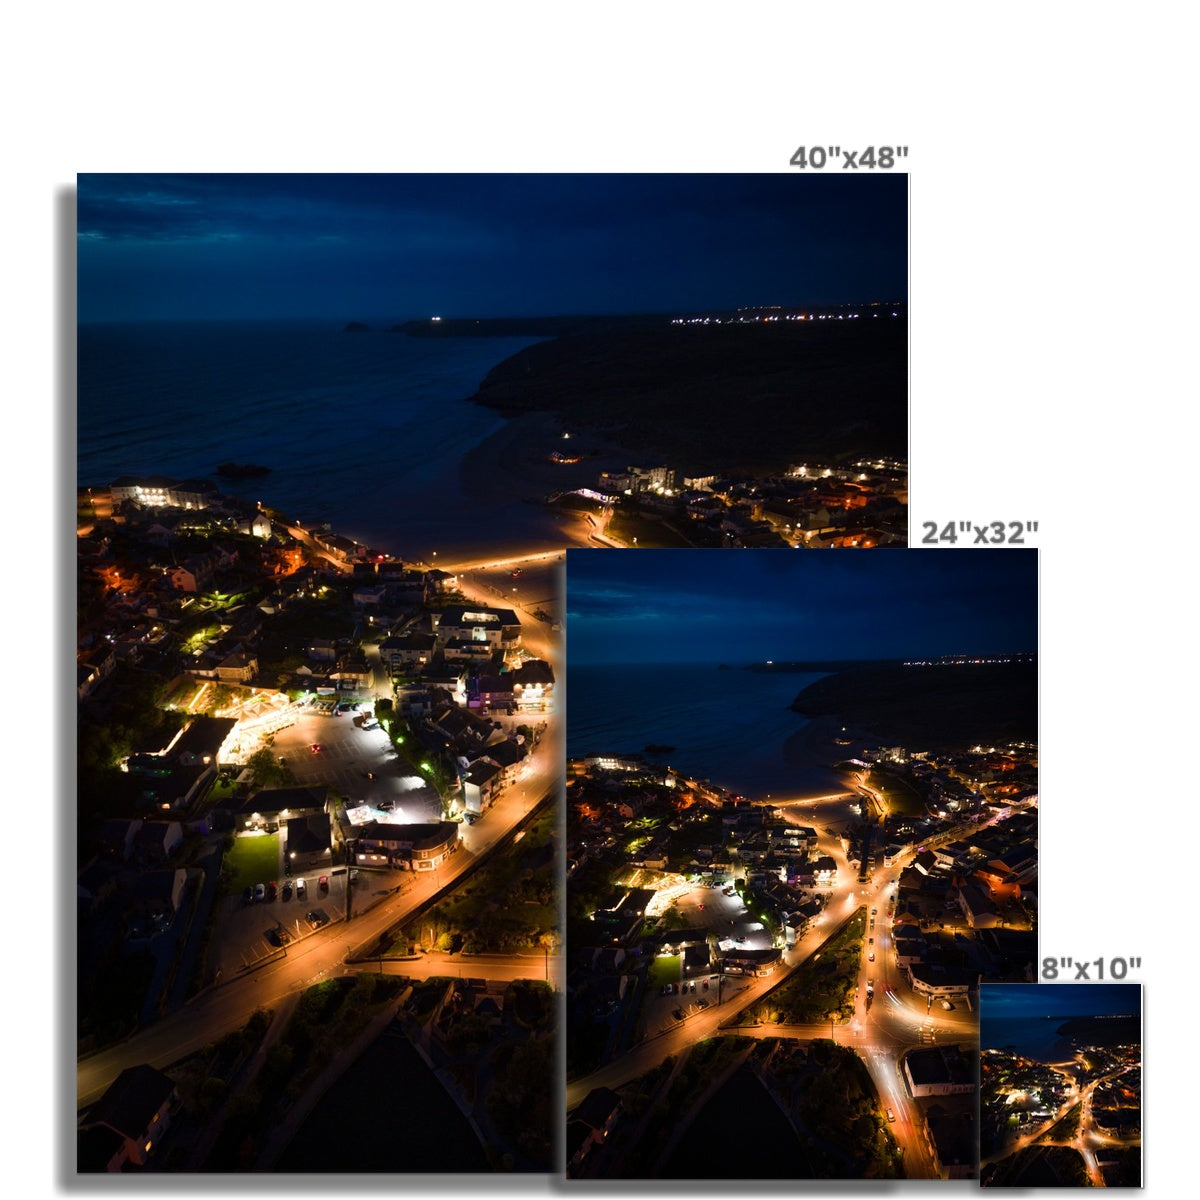 Perranporth By Night ~ Photograph